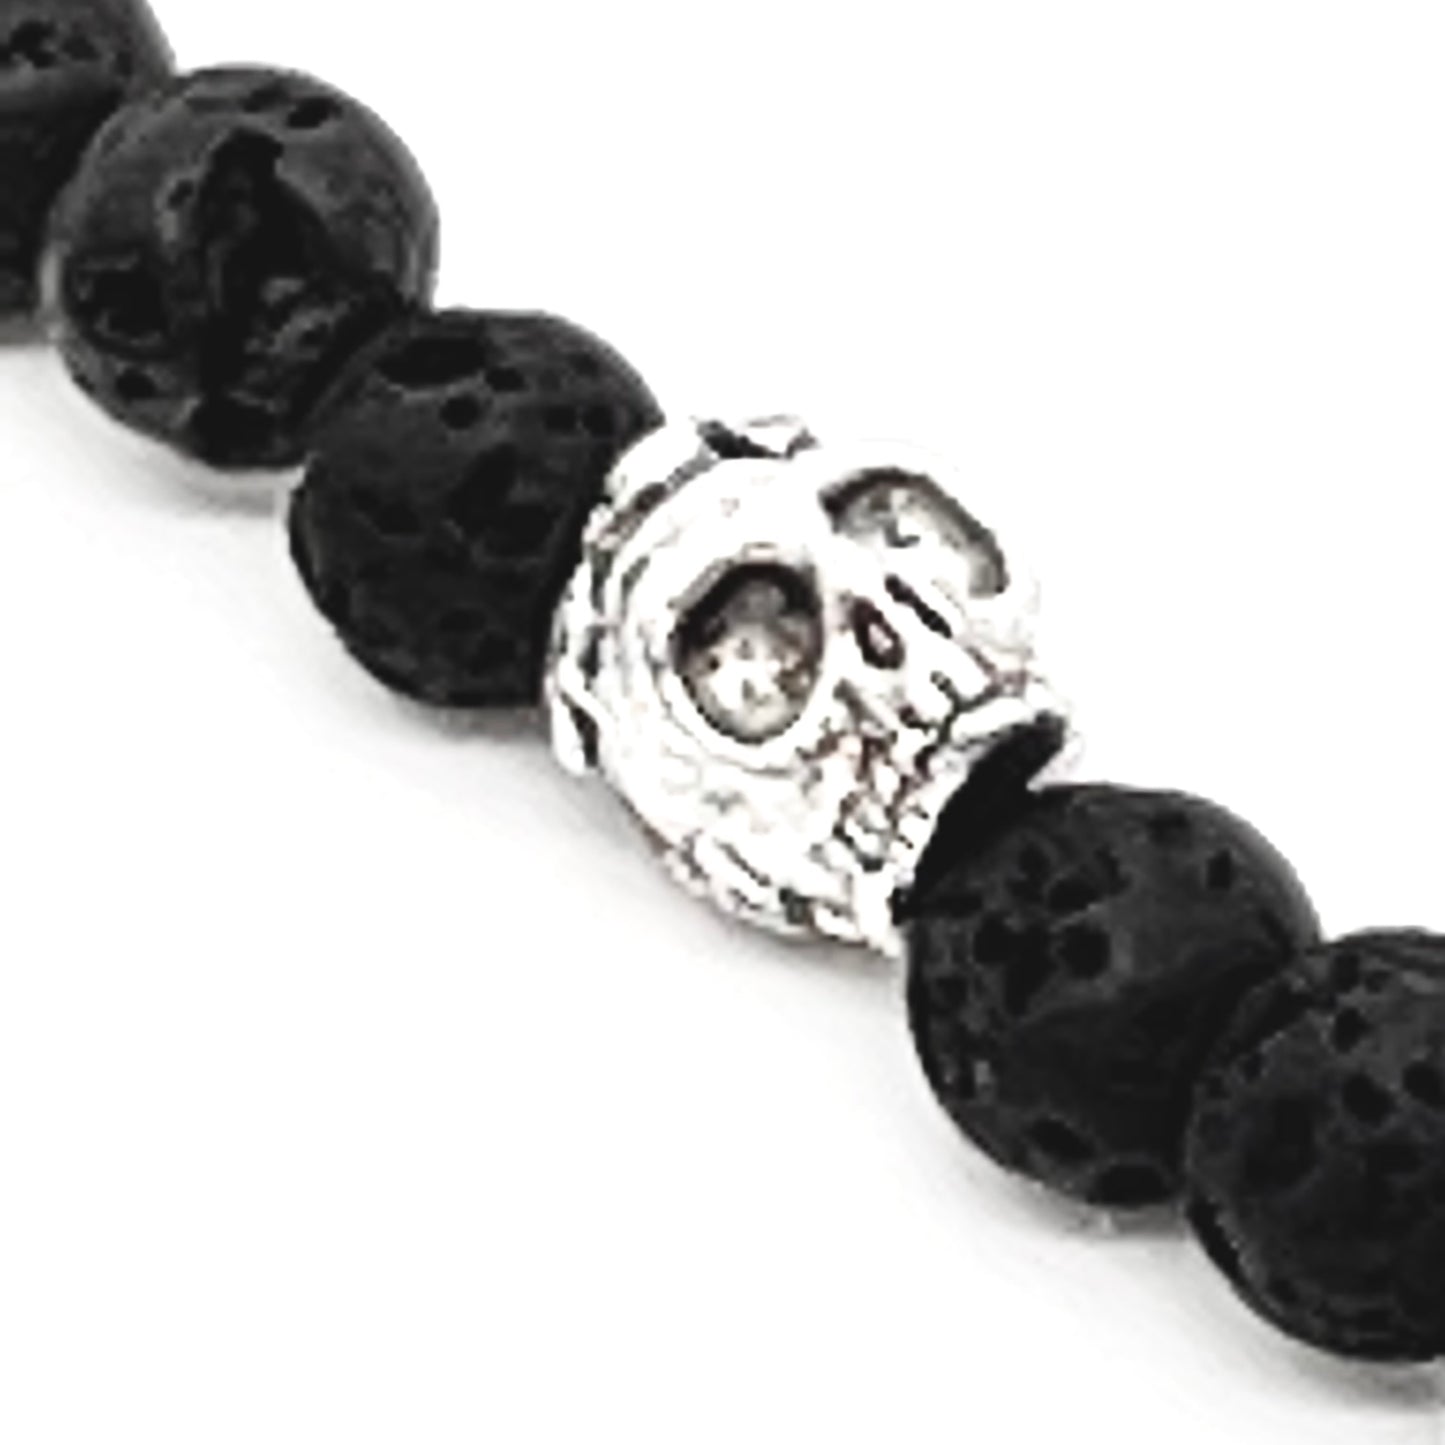 Necklace with skulls